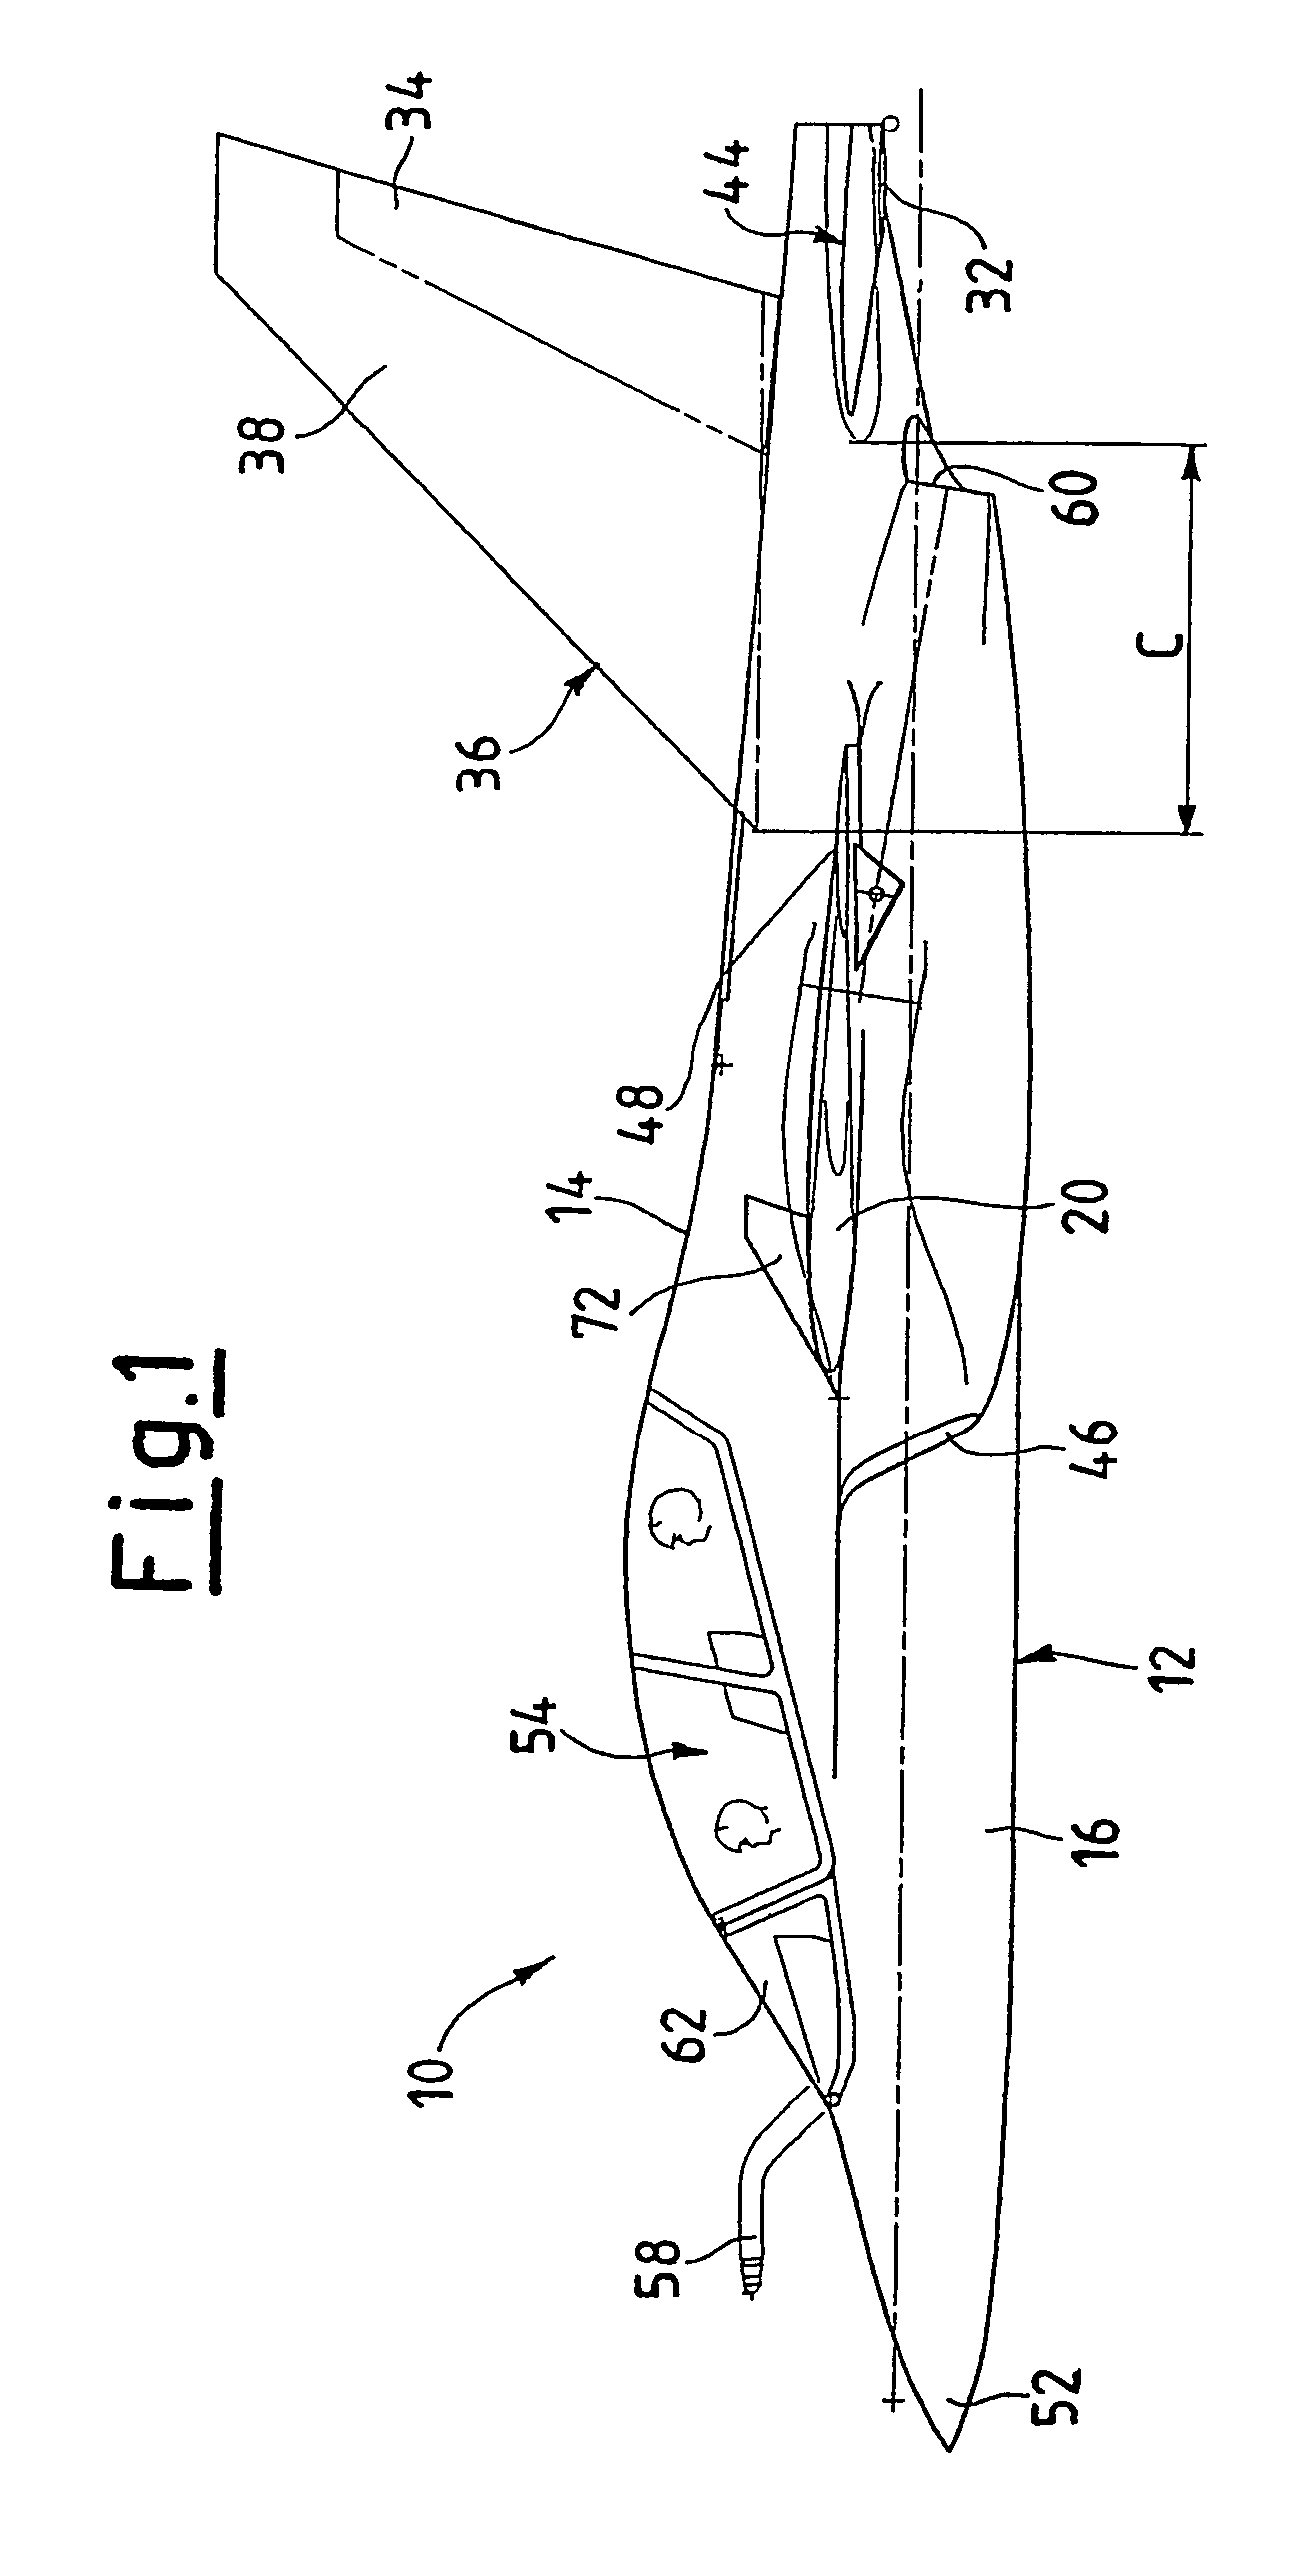 Aircraft configuration with improved aerodynamic performance